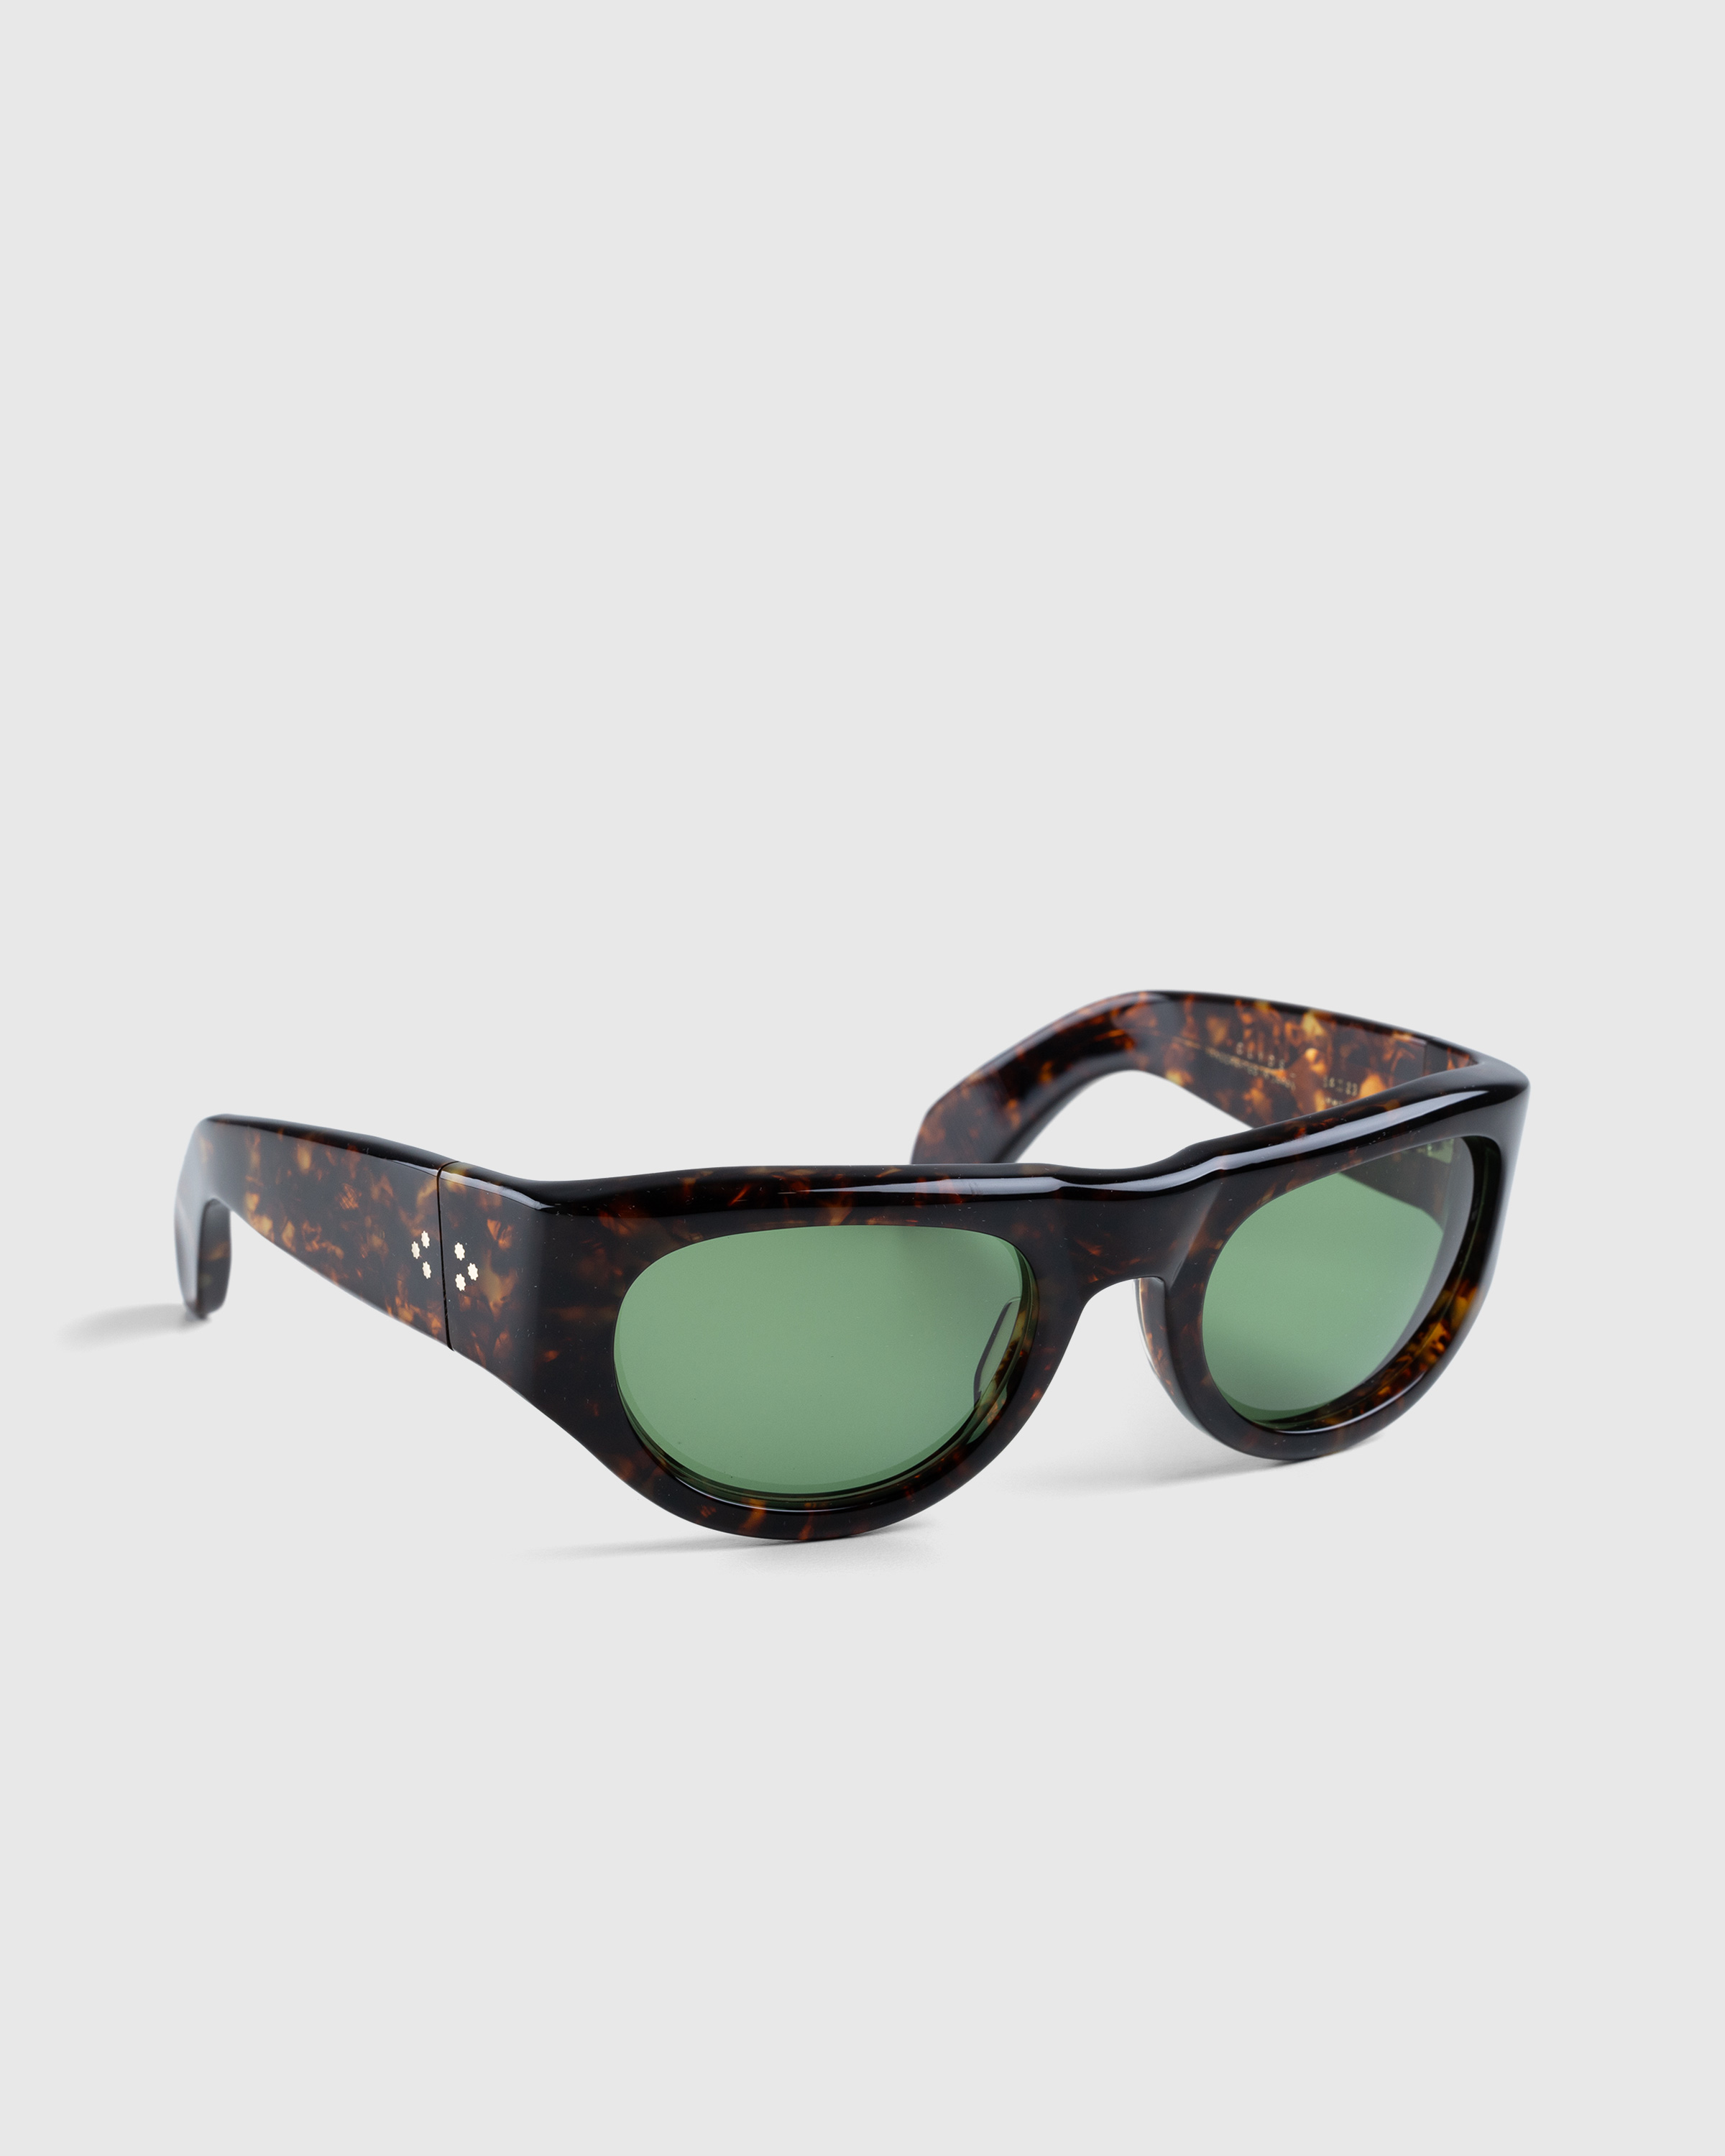 Jacques Marie Mage – Clyde Agar - Sunglasses - Brown - Image 3